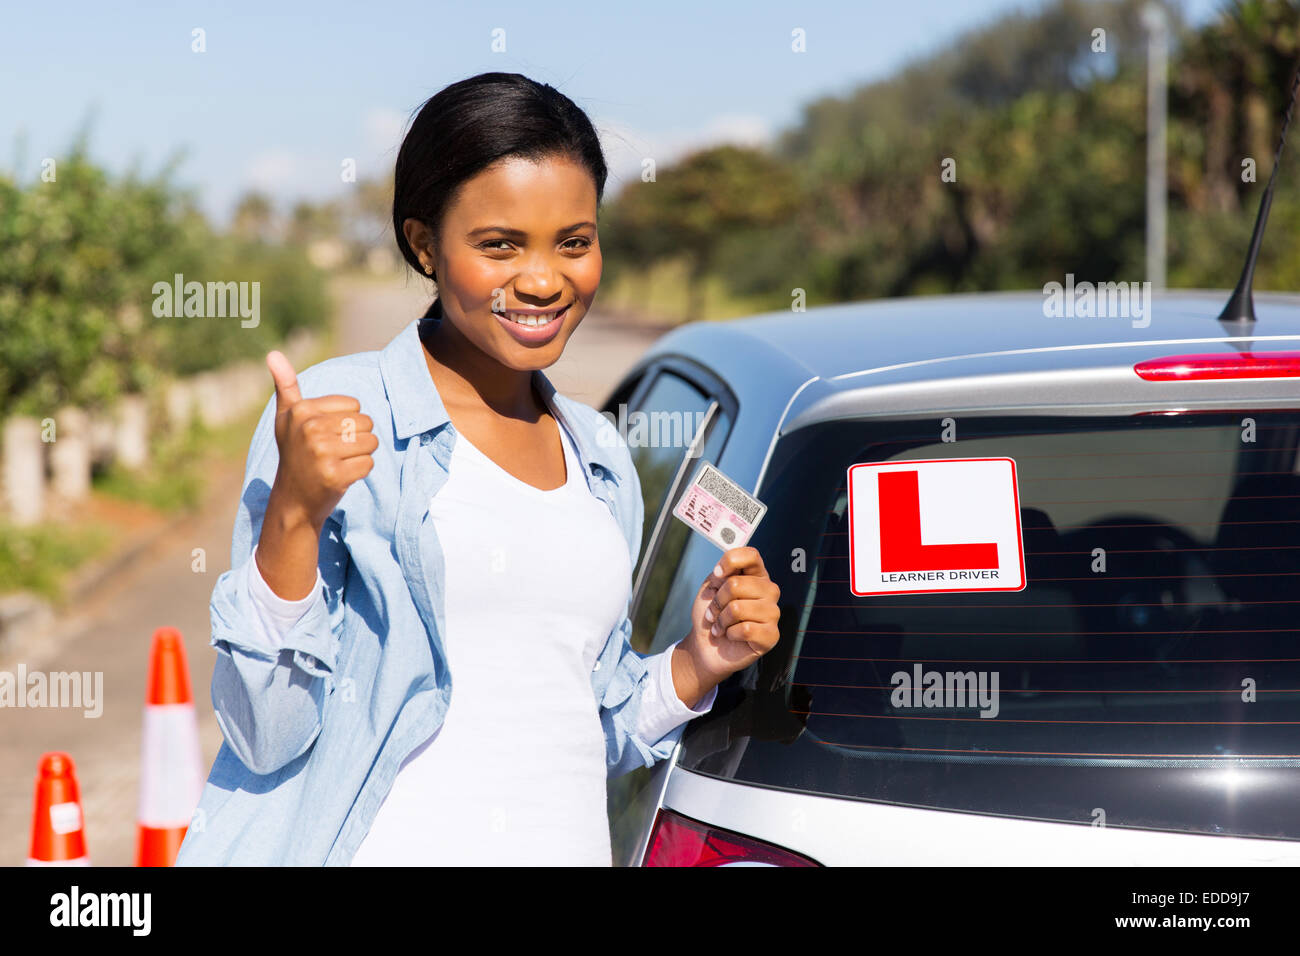 cheerful black woman showing a driving license she just got Stock Photo